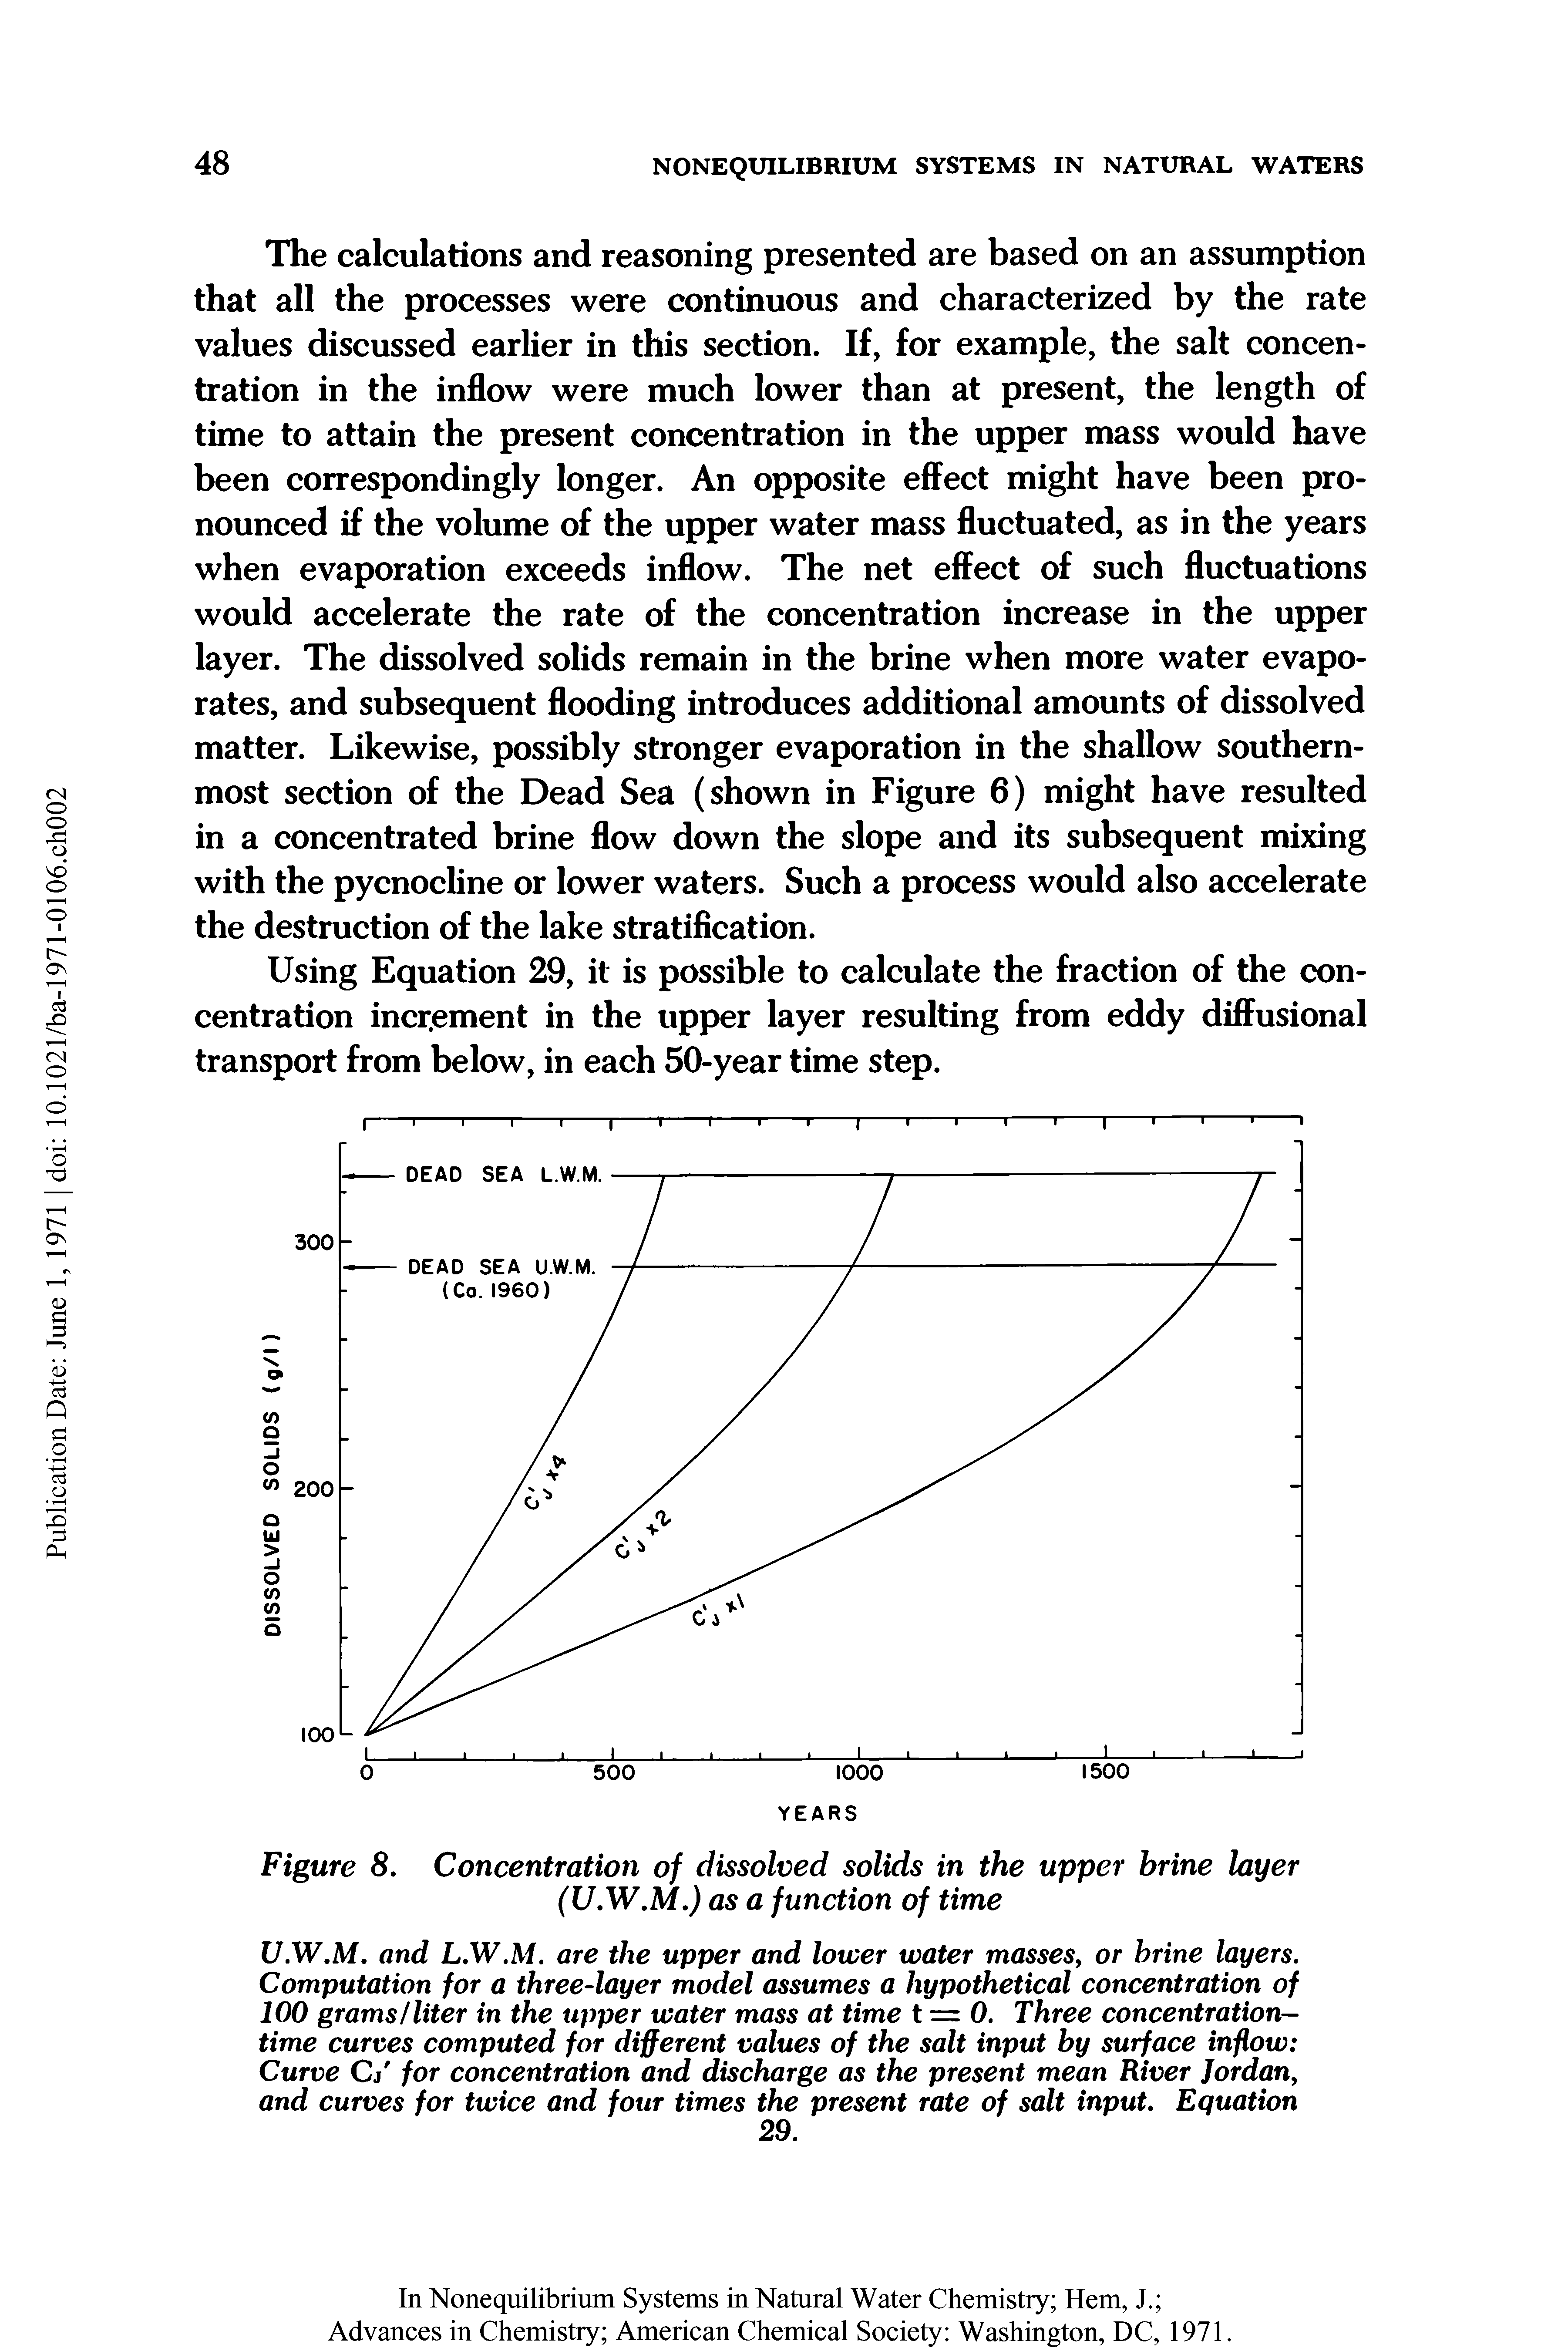 Figure 8. Concentration of dissolved solids in the upper brine layer (U.W.M.) as a function of time...